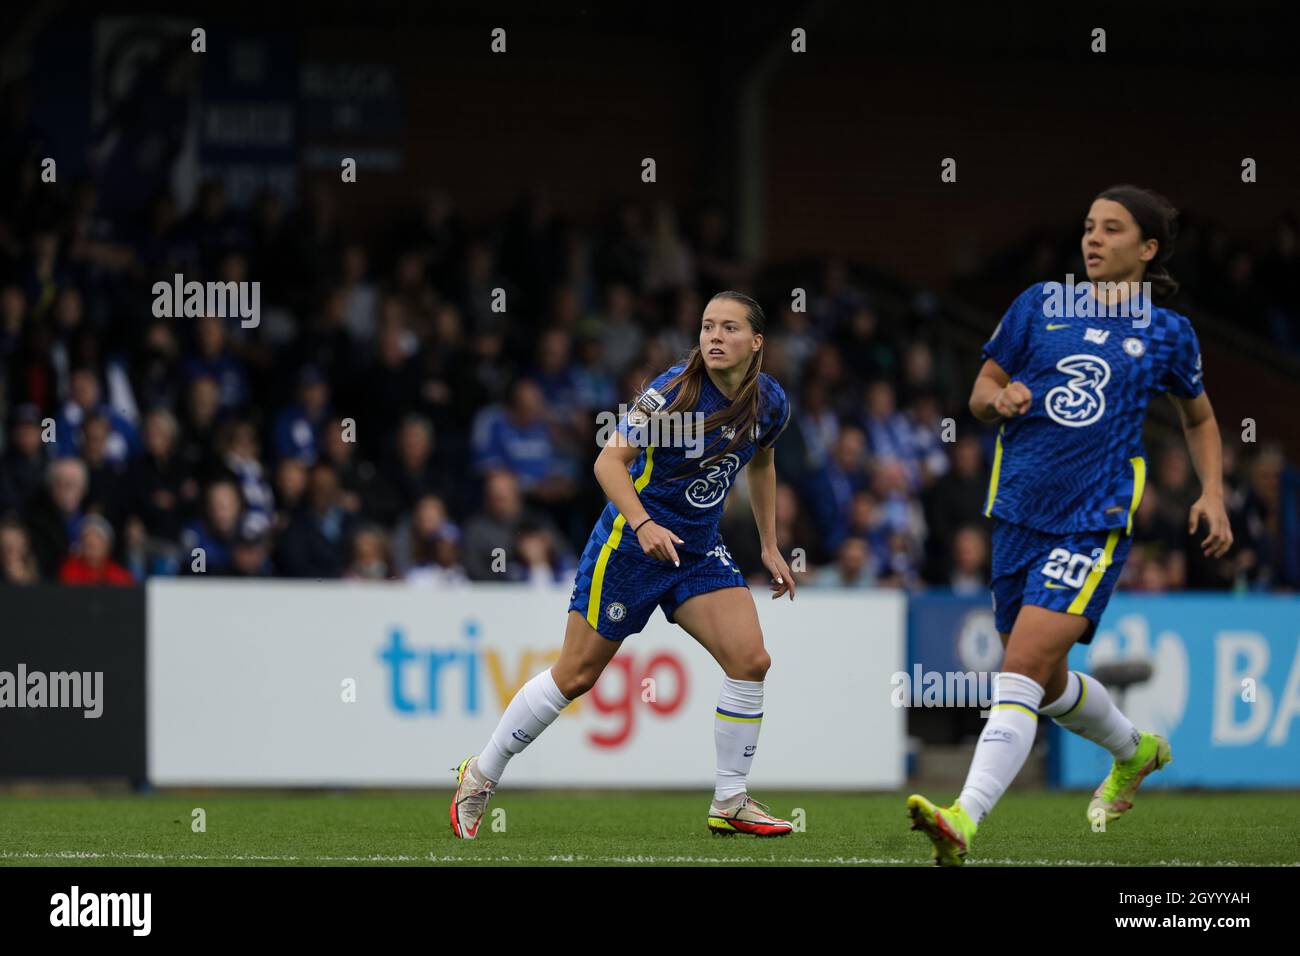 London, UK. 10th Oct, 2021. Fran Kirby (14 Chelsea) at the Barclays FA Womens Super League game between Chelsea and Leicester City at Kingsmeadow in London, England. Credit: SPP Sport Press Photo. /Alamy Live News Stock Photo